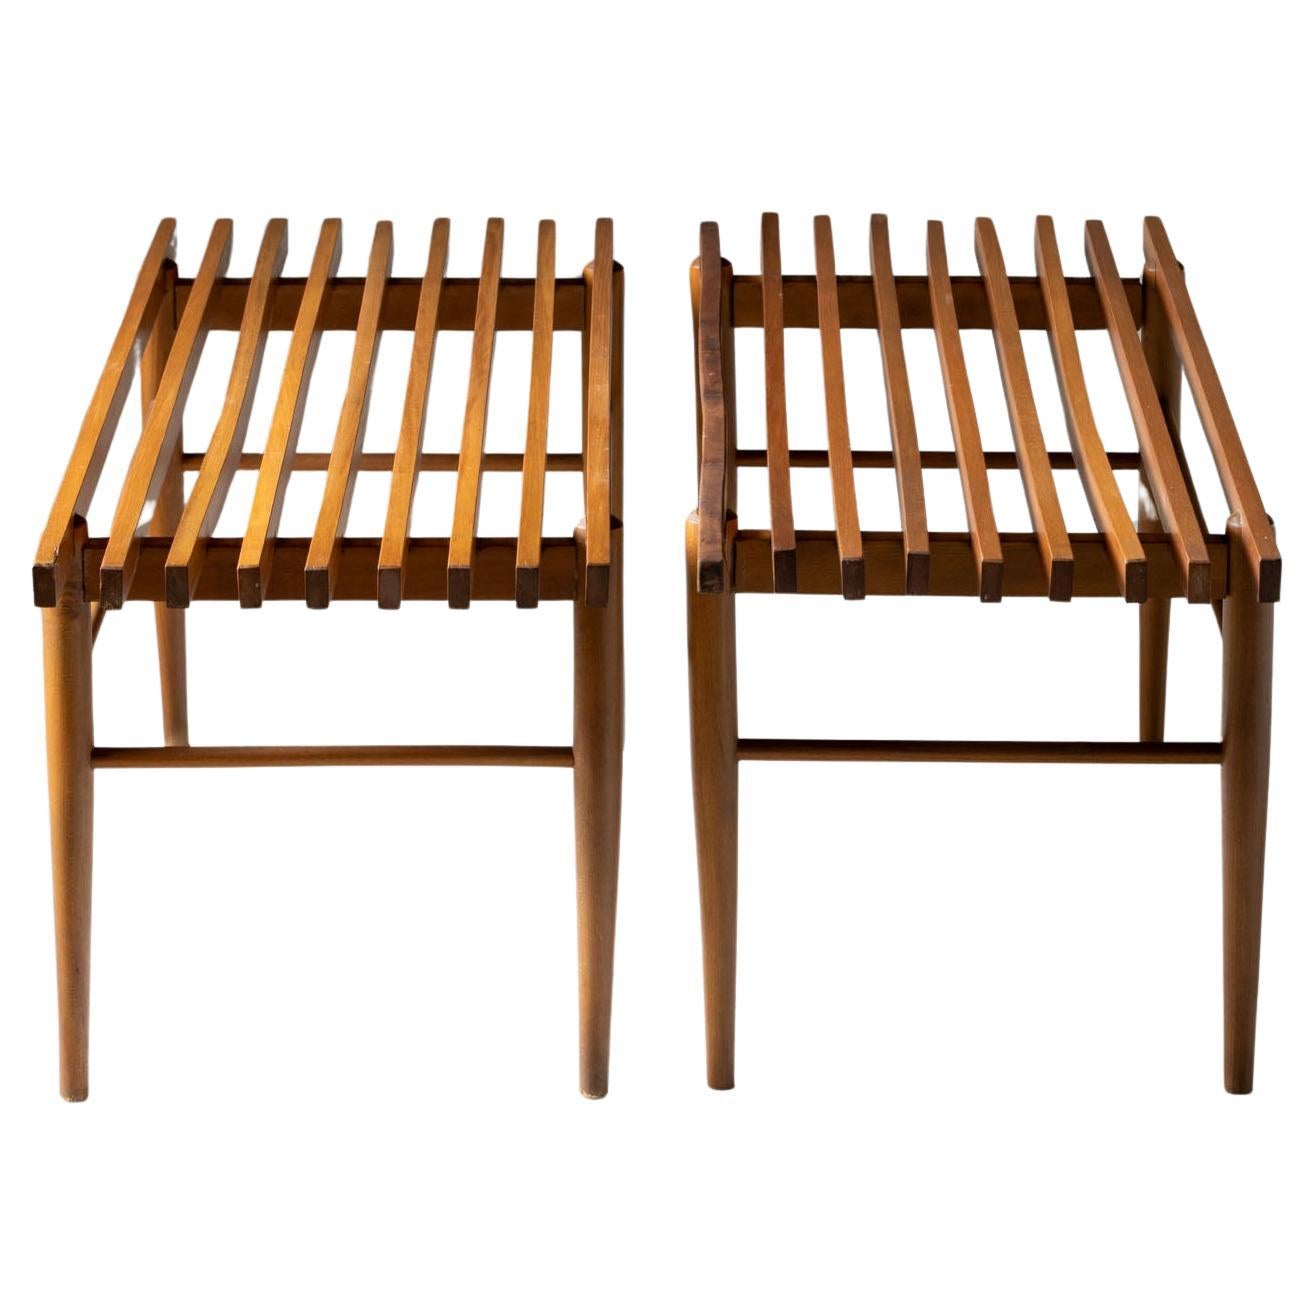 Slatted Wooden Benches, Italy Mid-20th Century For Sale